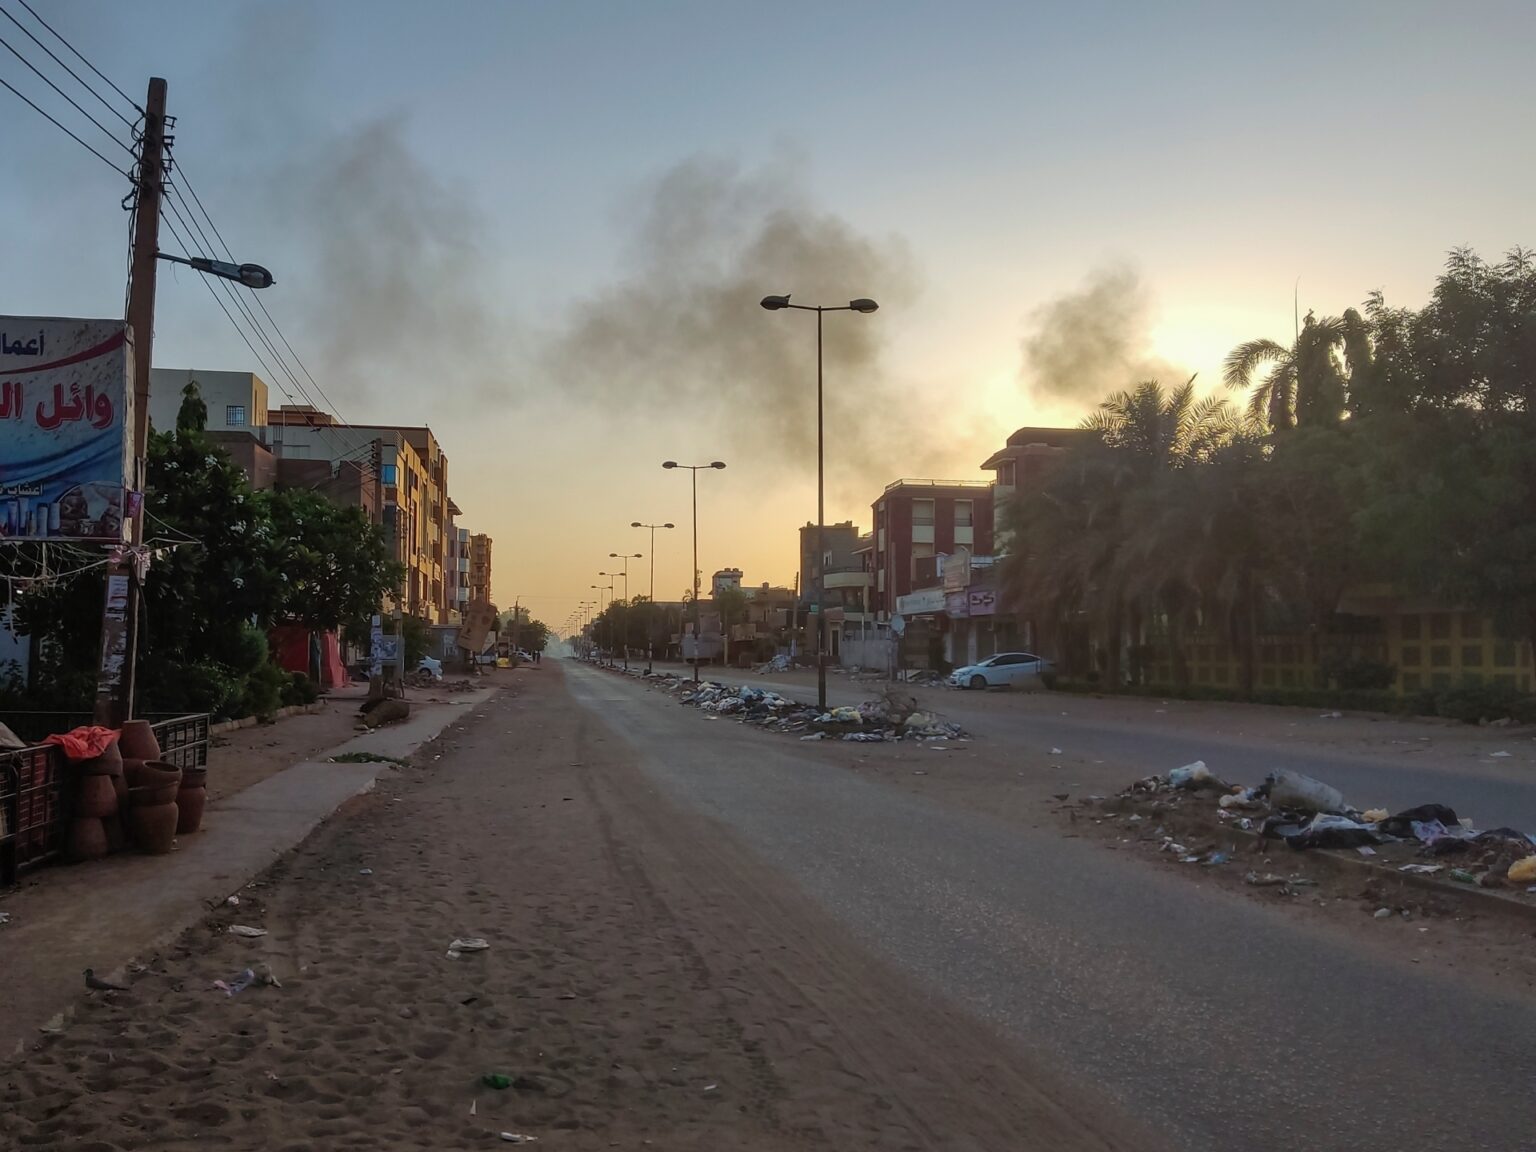 Fighting rages in Sudan as mediators try to end it